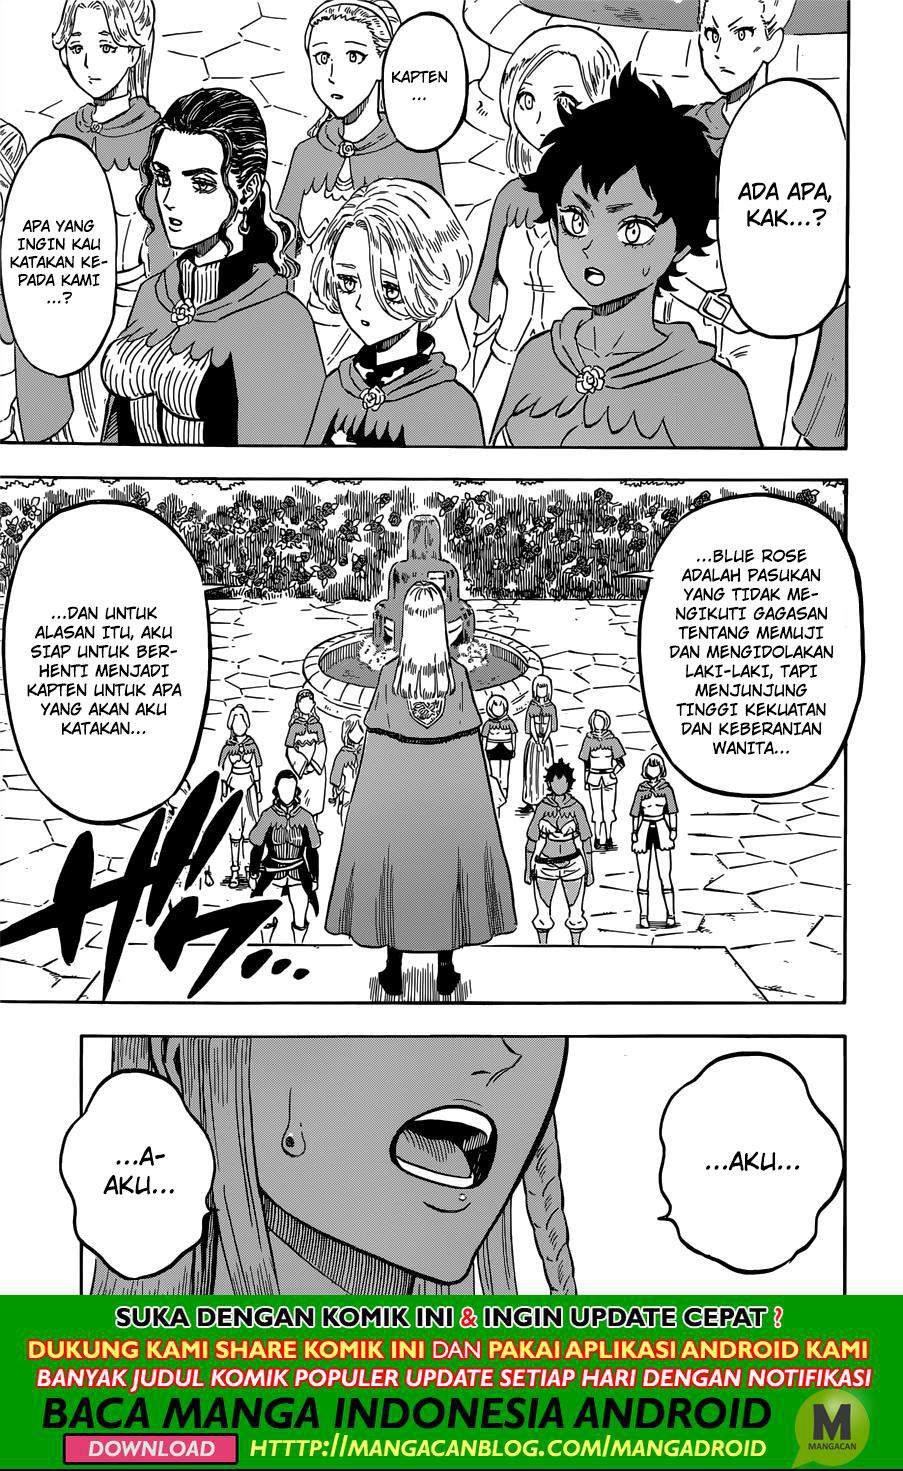 Black Clover Chapter 221 Bahasa Indonesia